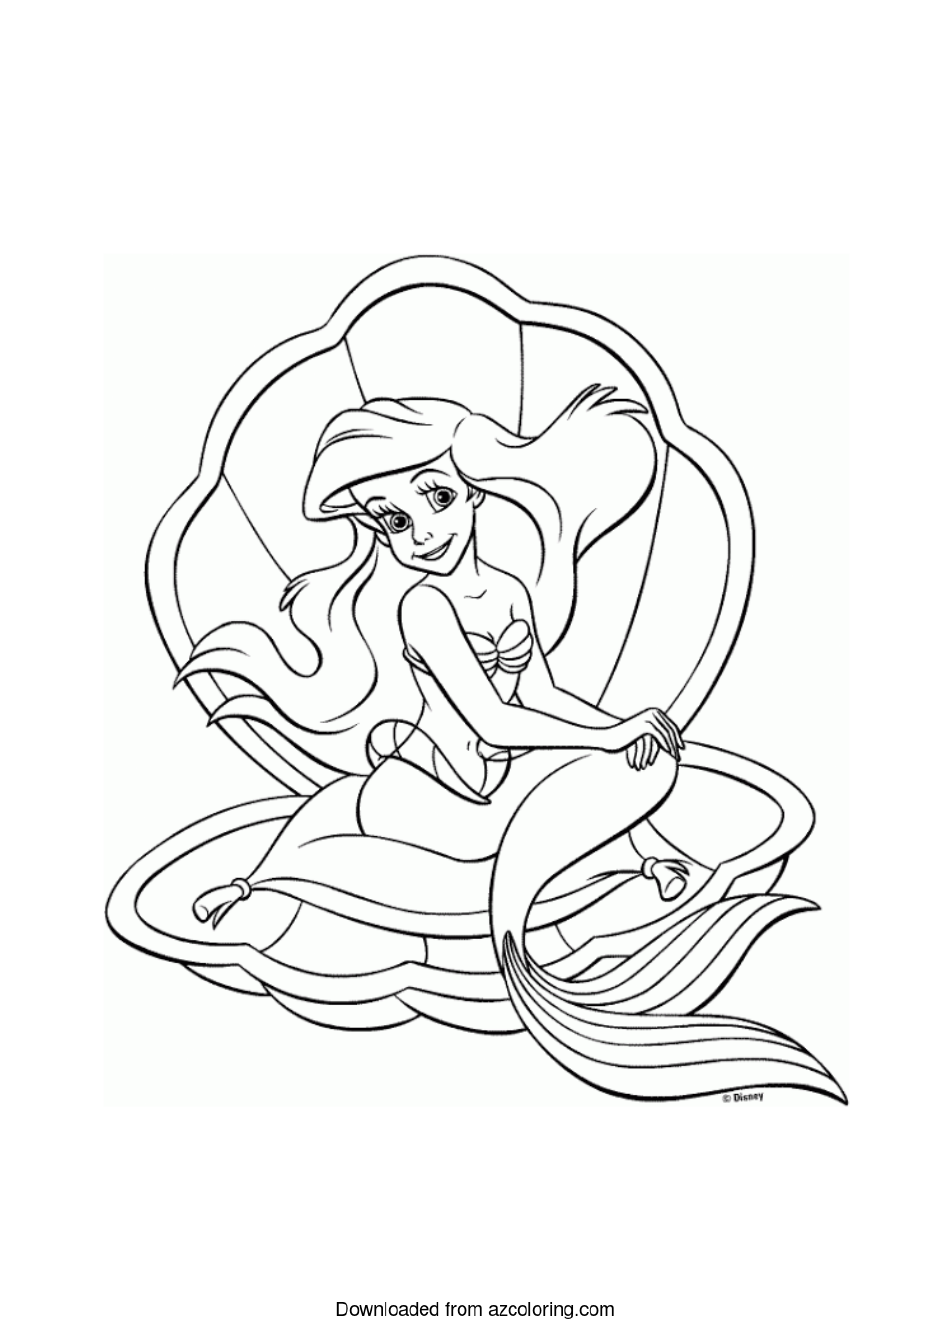 Ariel in a shell coloring page